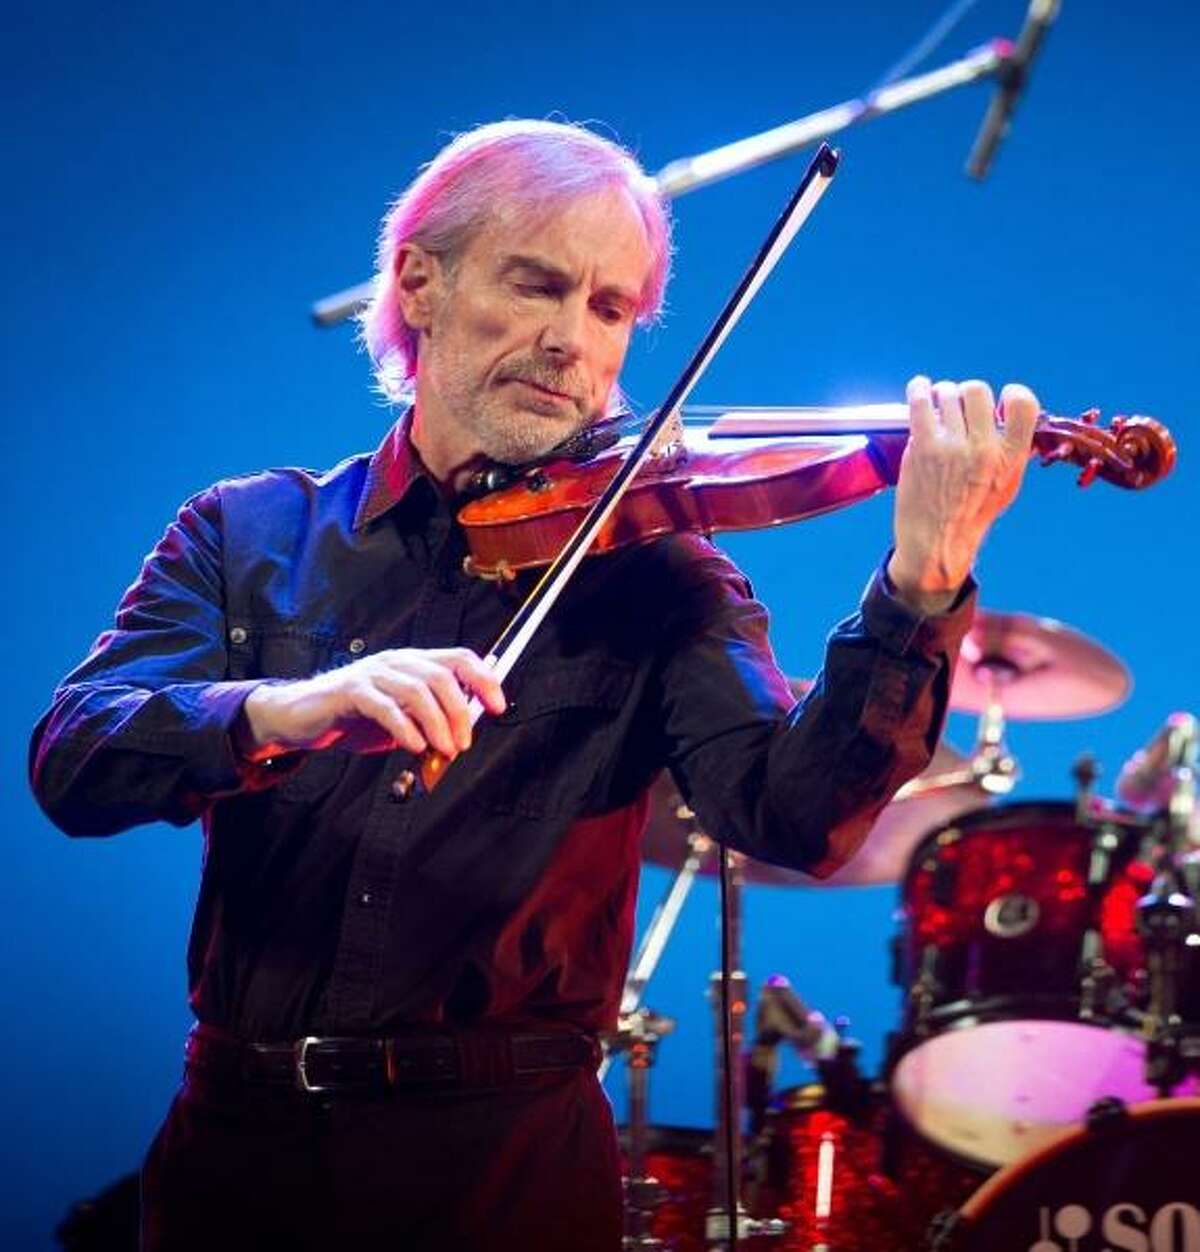 VIOLIN MASTER: Legendary French violinist Jean Luc Ponty and his jazz/rock band will be performing at The Warehouse in Fairfield on Aug. 29. Tickets ($63-$68) are available at fairfieldtheatre.org.